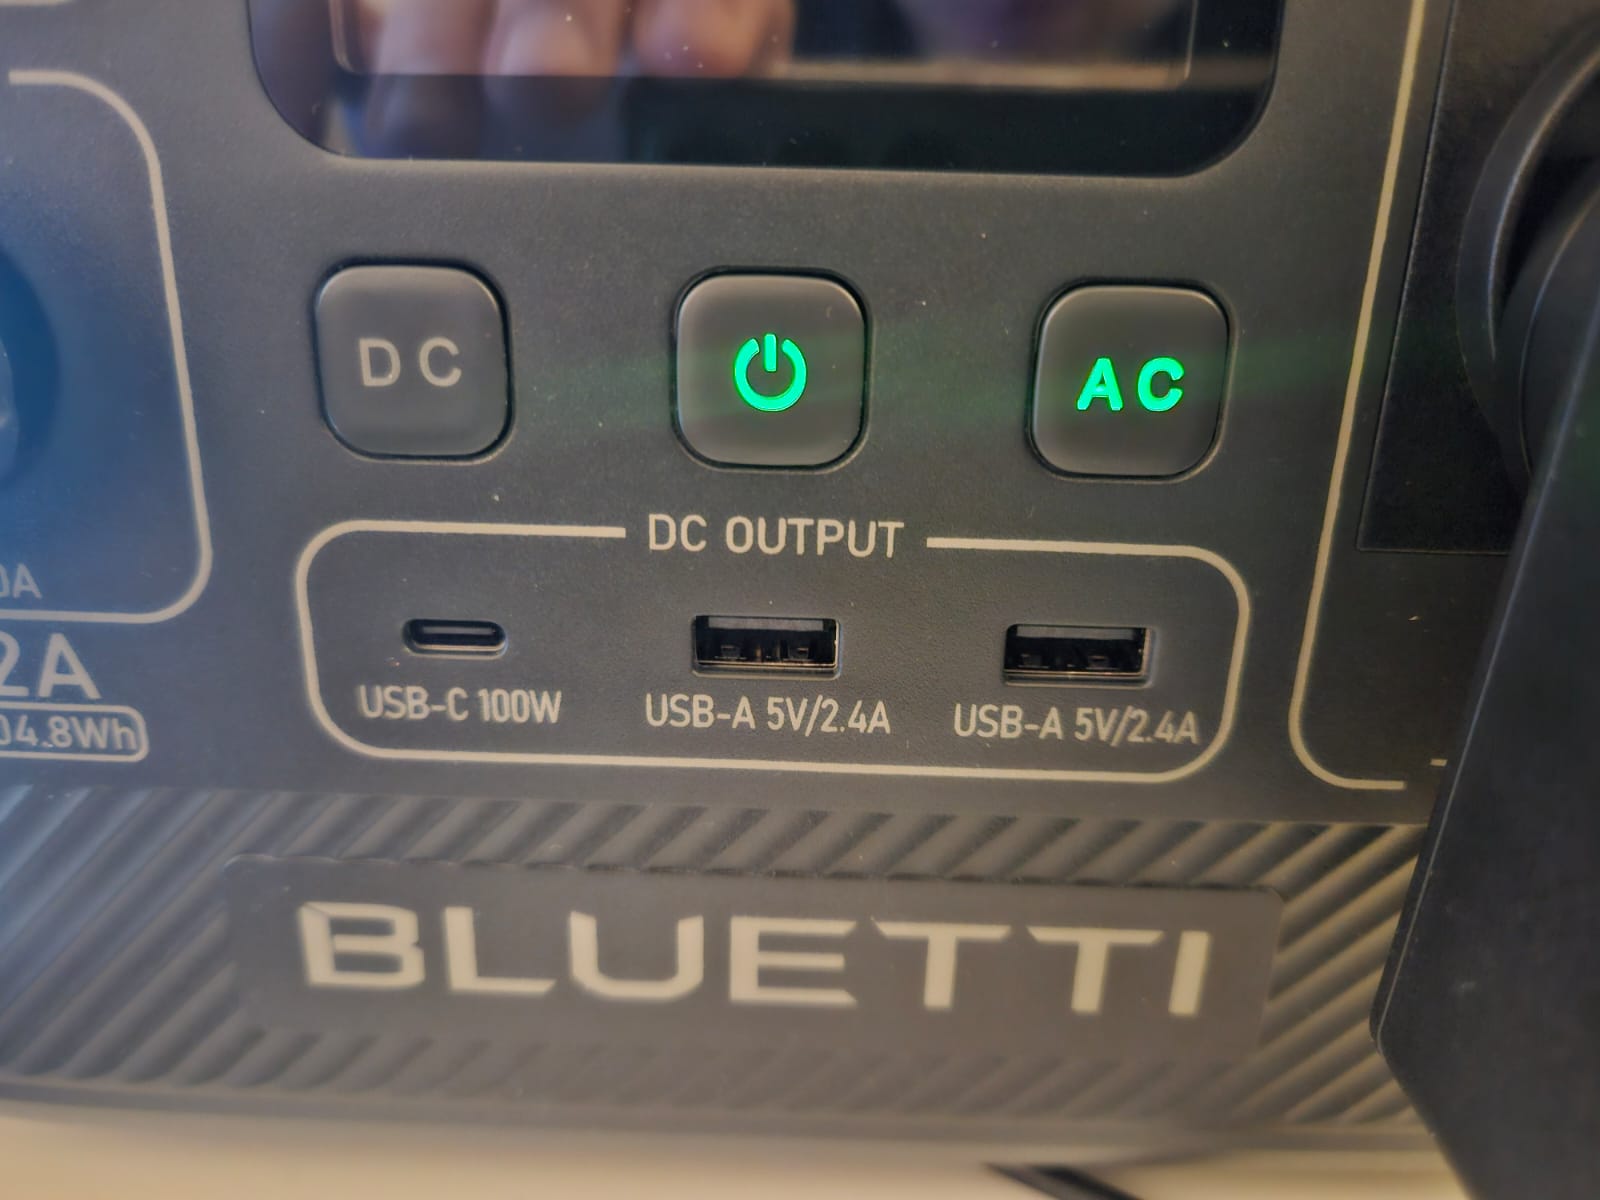 Bluetti AC2A review: compact and easy to handle